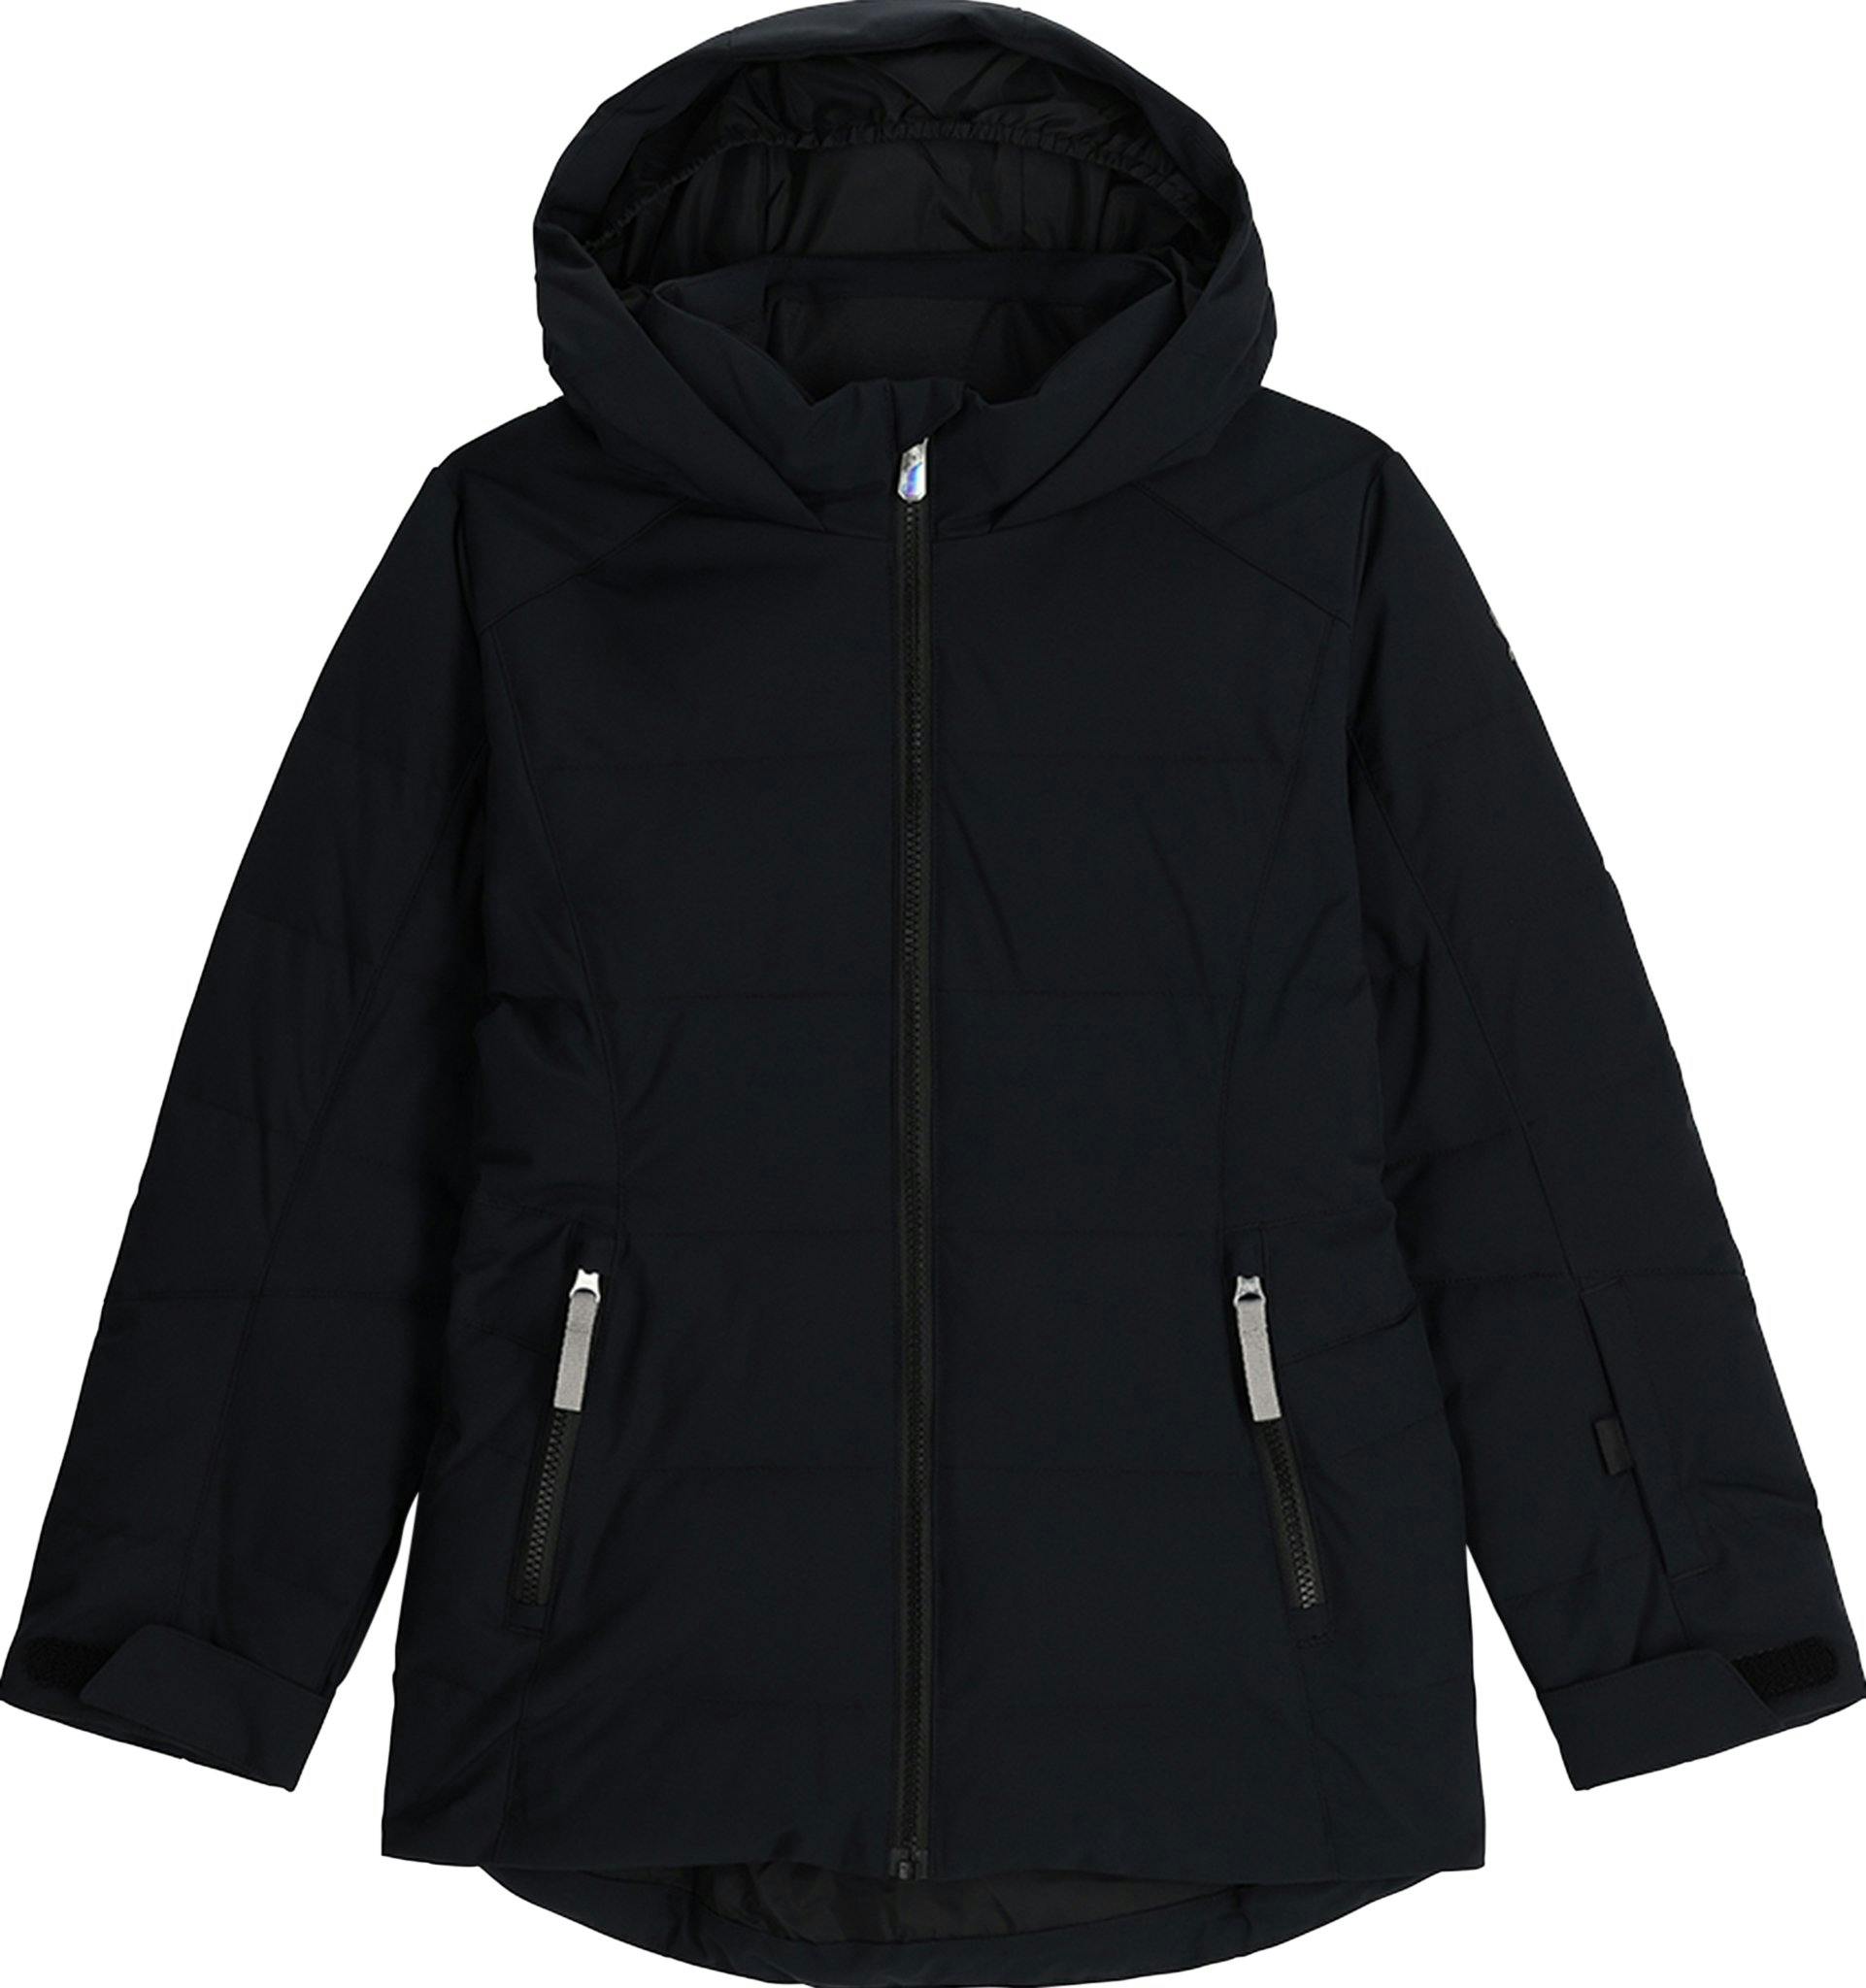 Product image for Zadie Synthetic Down Jacket - Girls